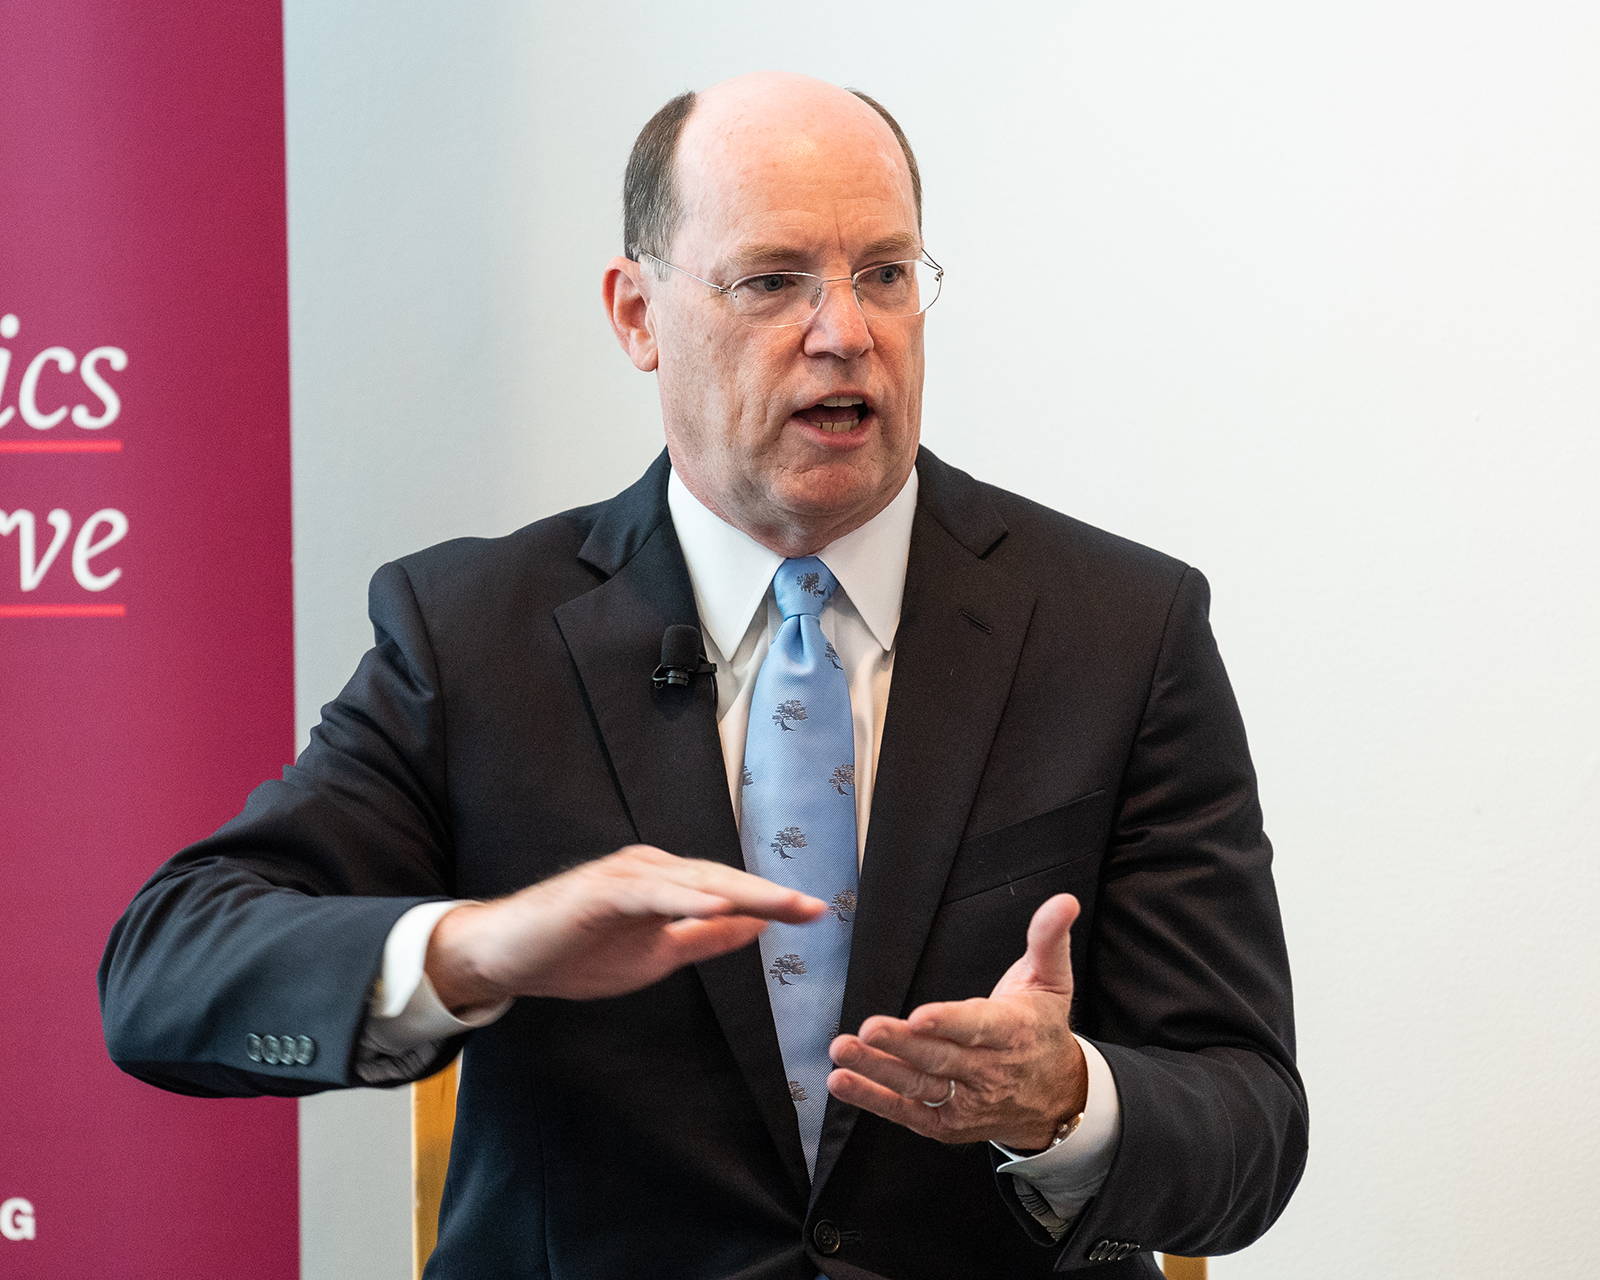 Dennis Kelleher, President and Chief Executive Officer of Better Markets, during a discussion at Scandinavia House in New York City in 2018.